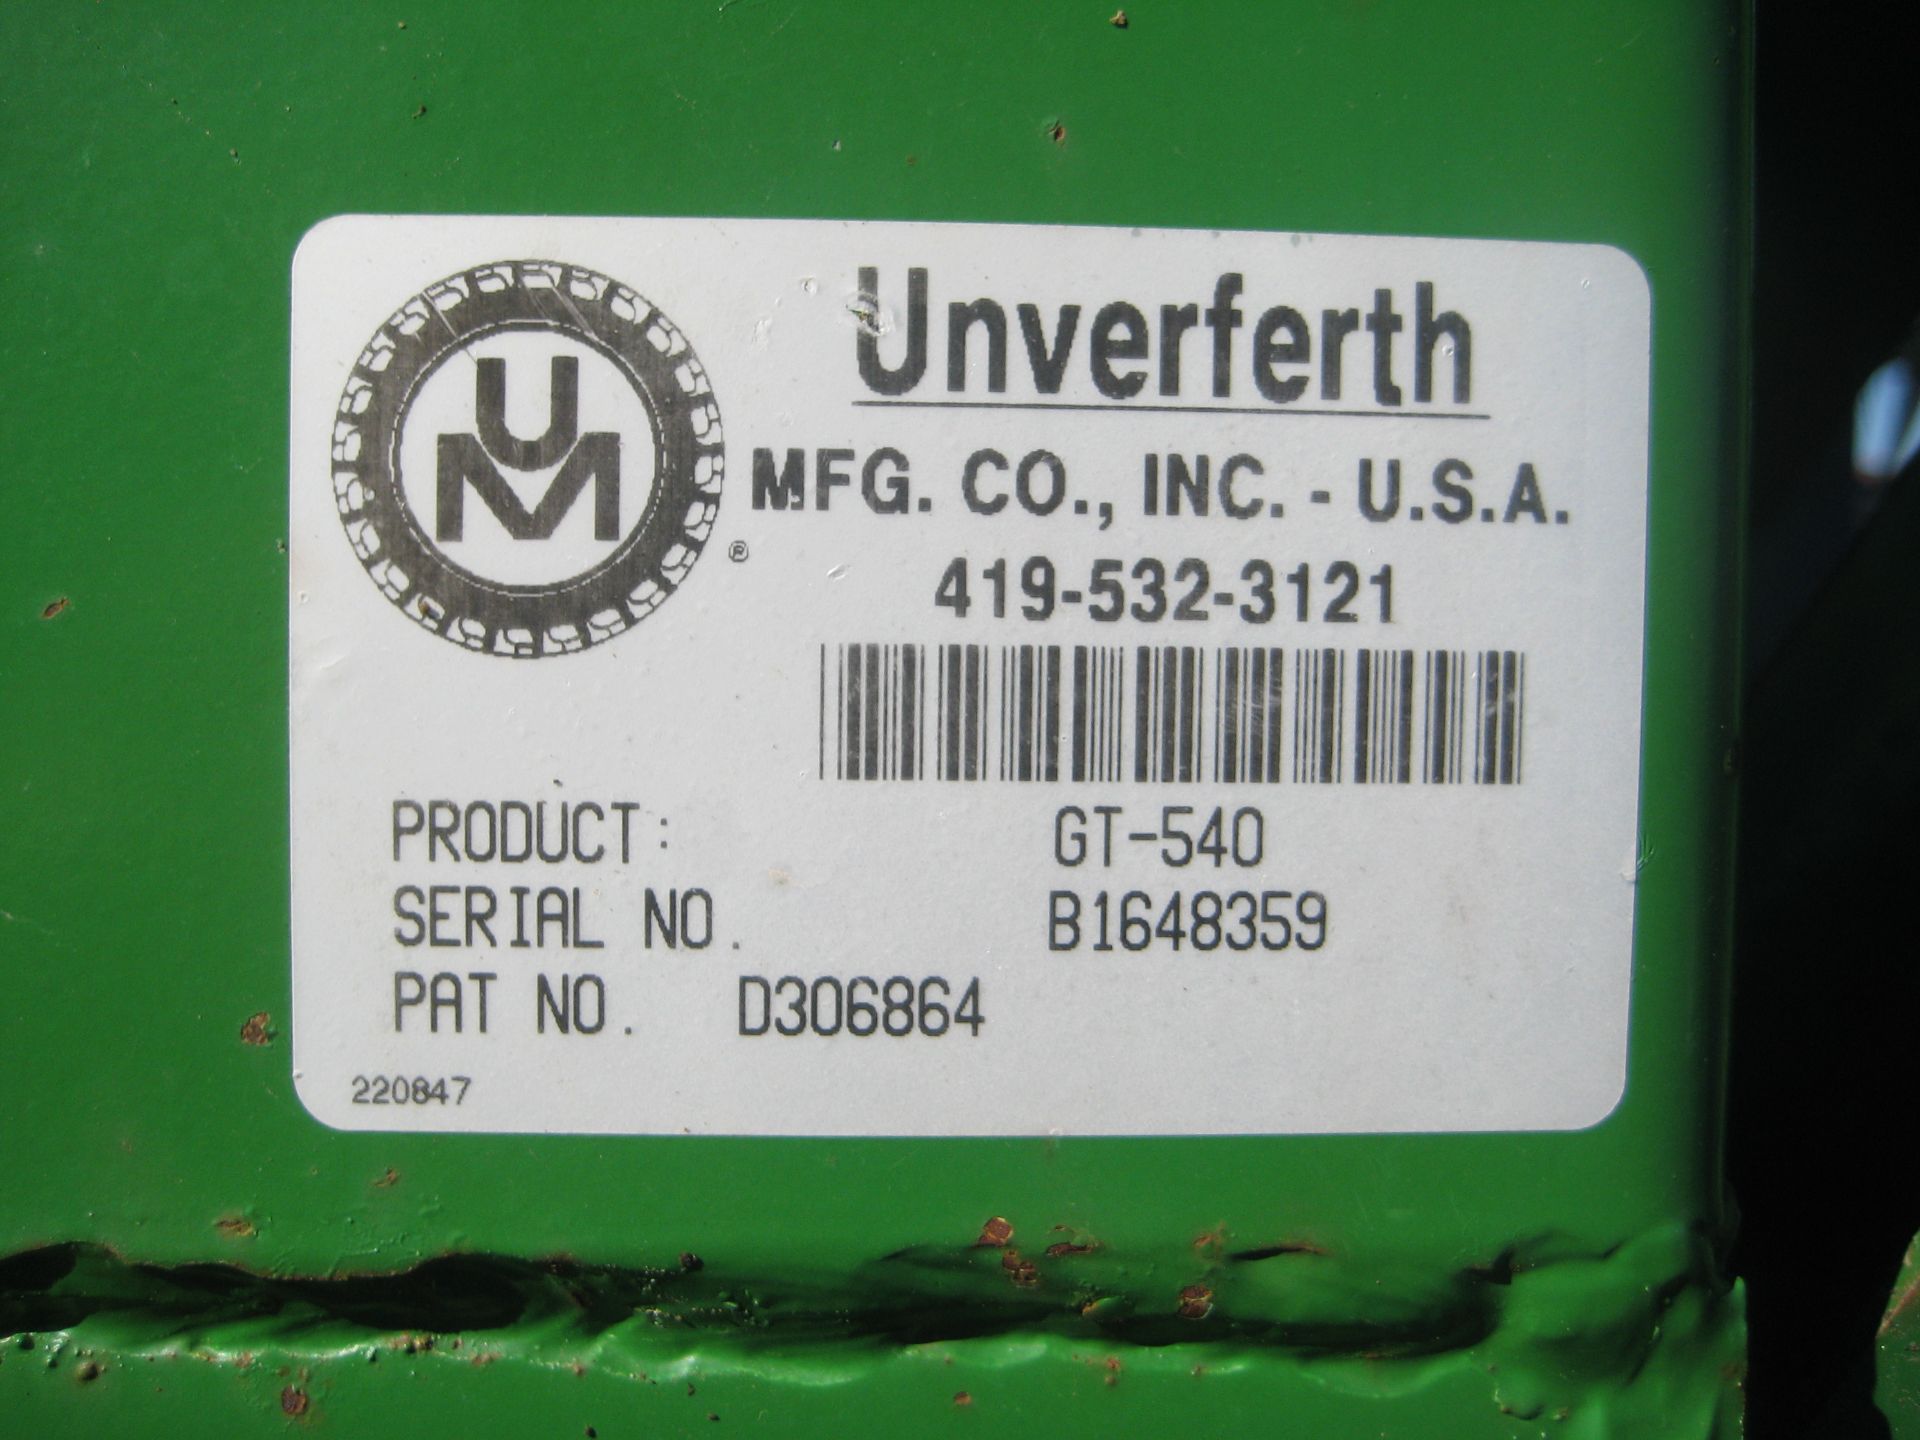 Brent 540 Gravity Wagon, 425-65R/22.5 tires, green - Image 13 of 13